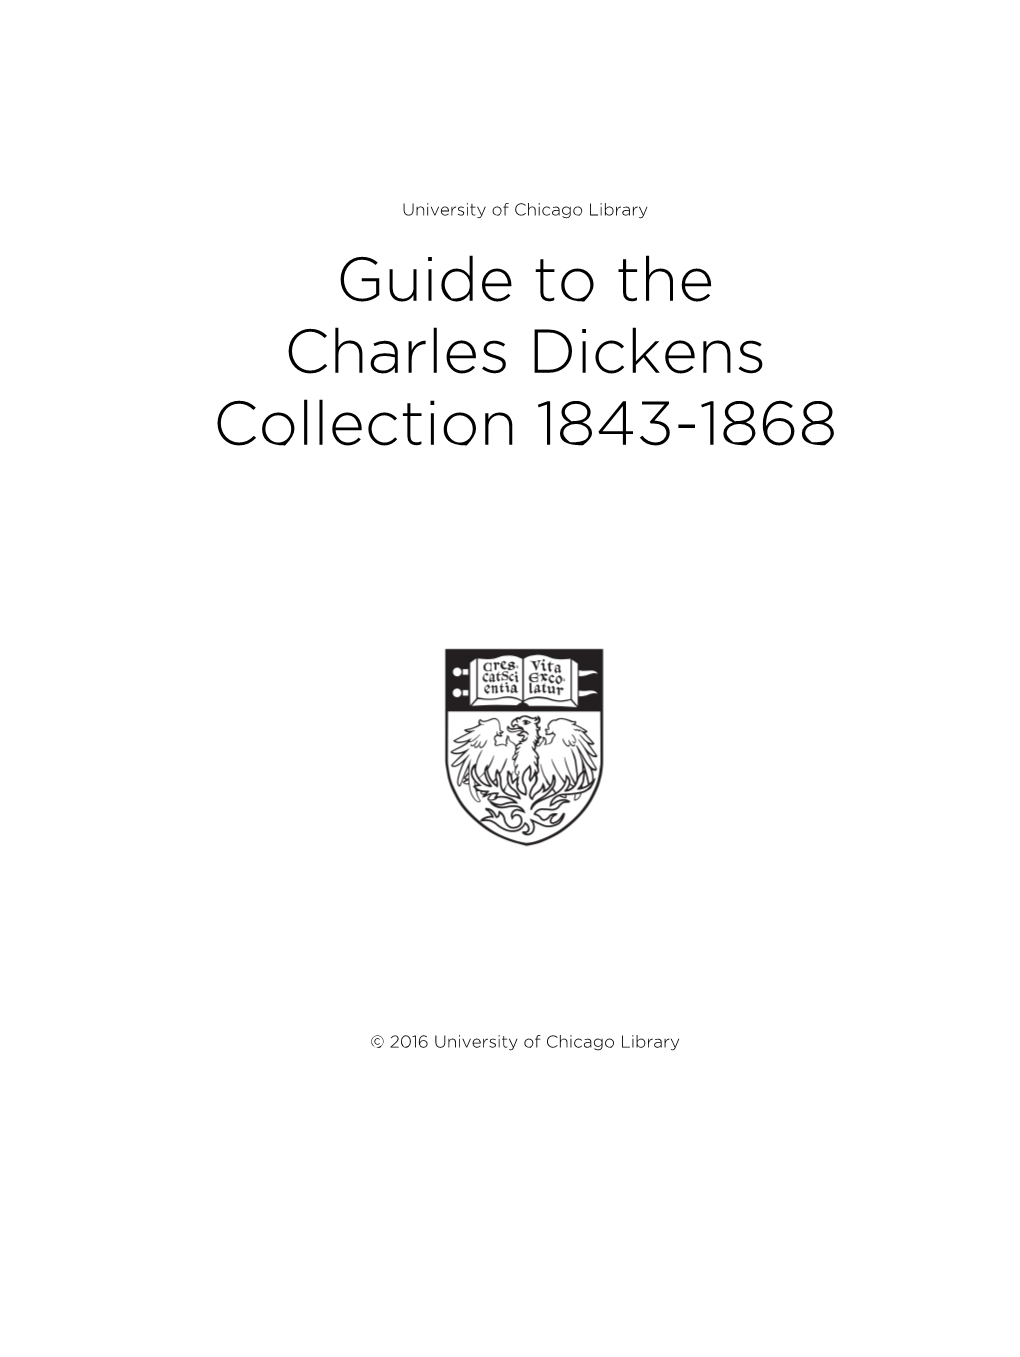 Guide to the Charles Dickens Collection 1843-1868